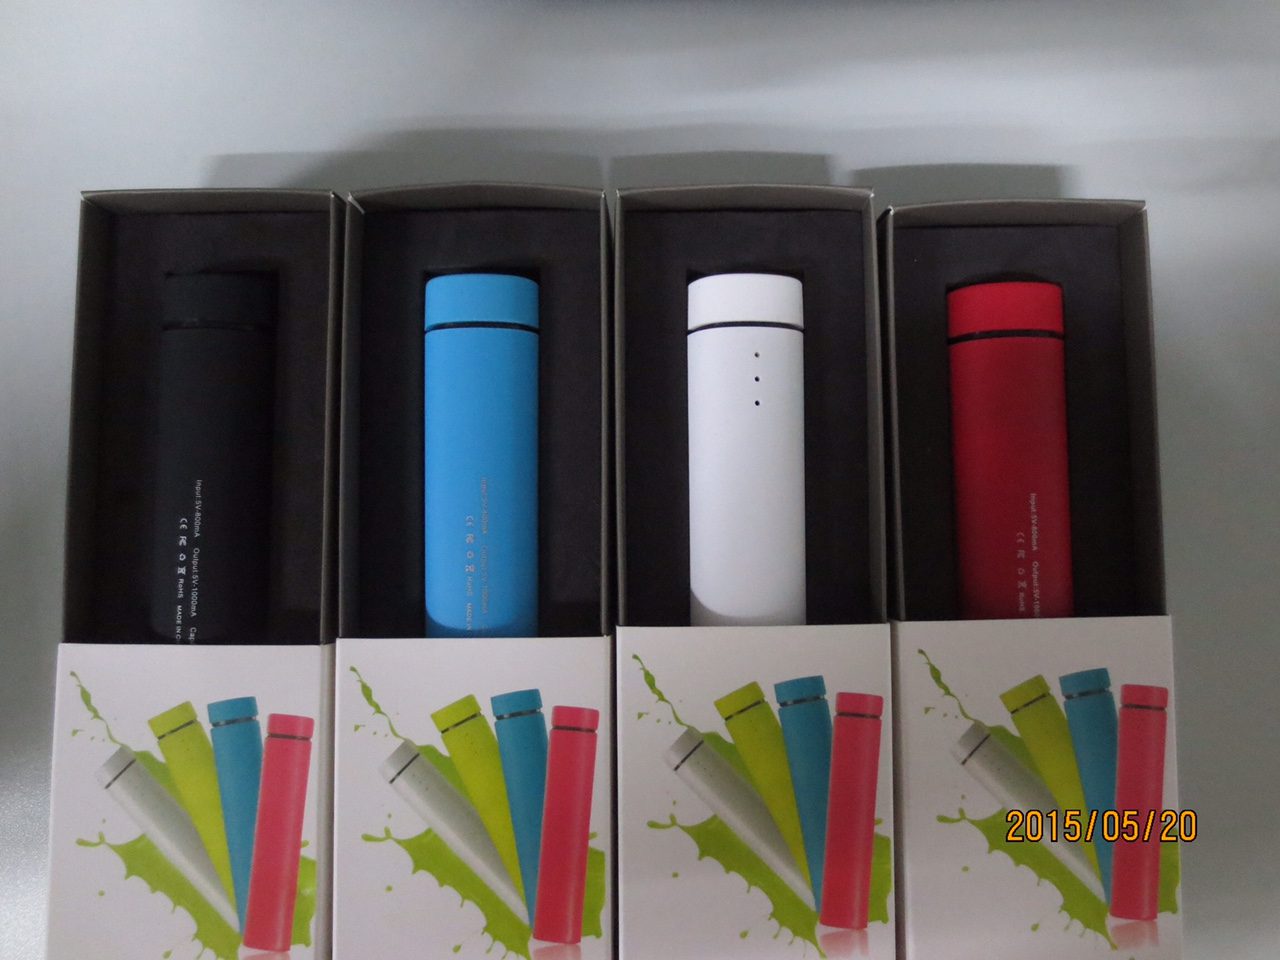 Four Power Bands in Four Colors